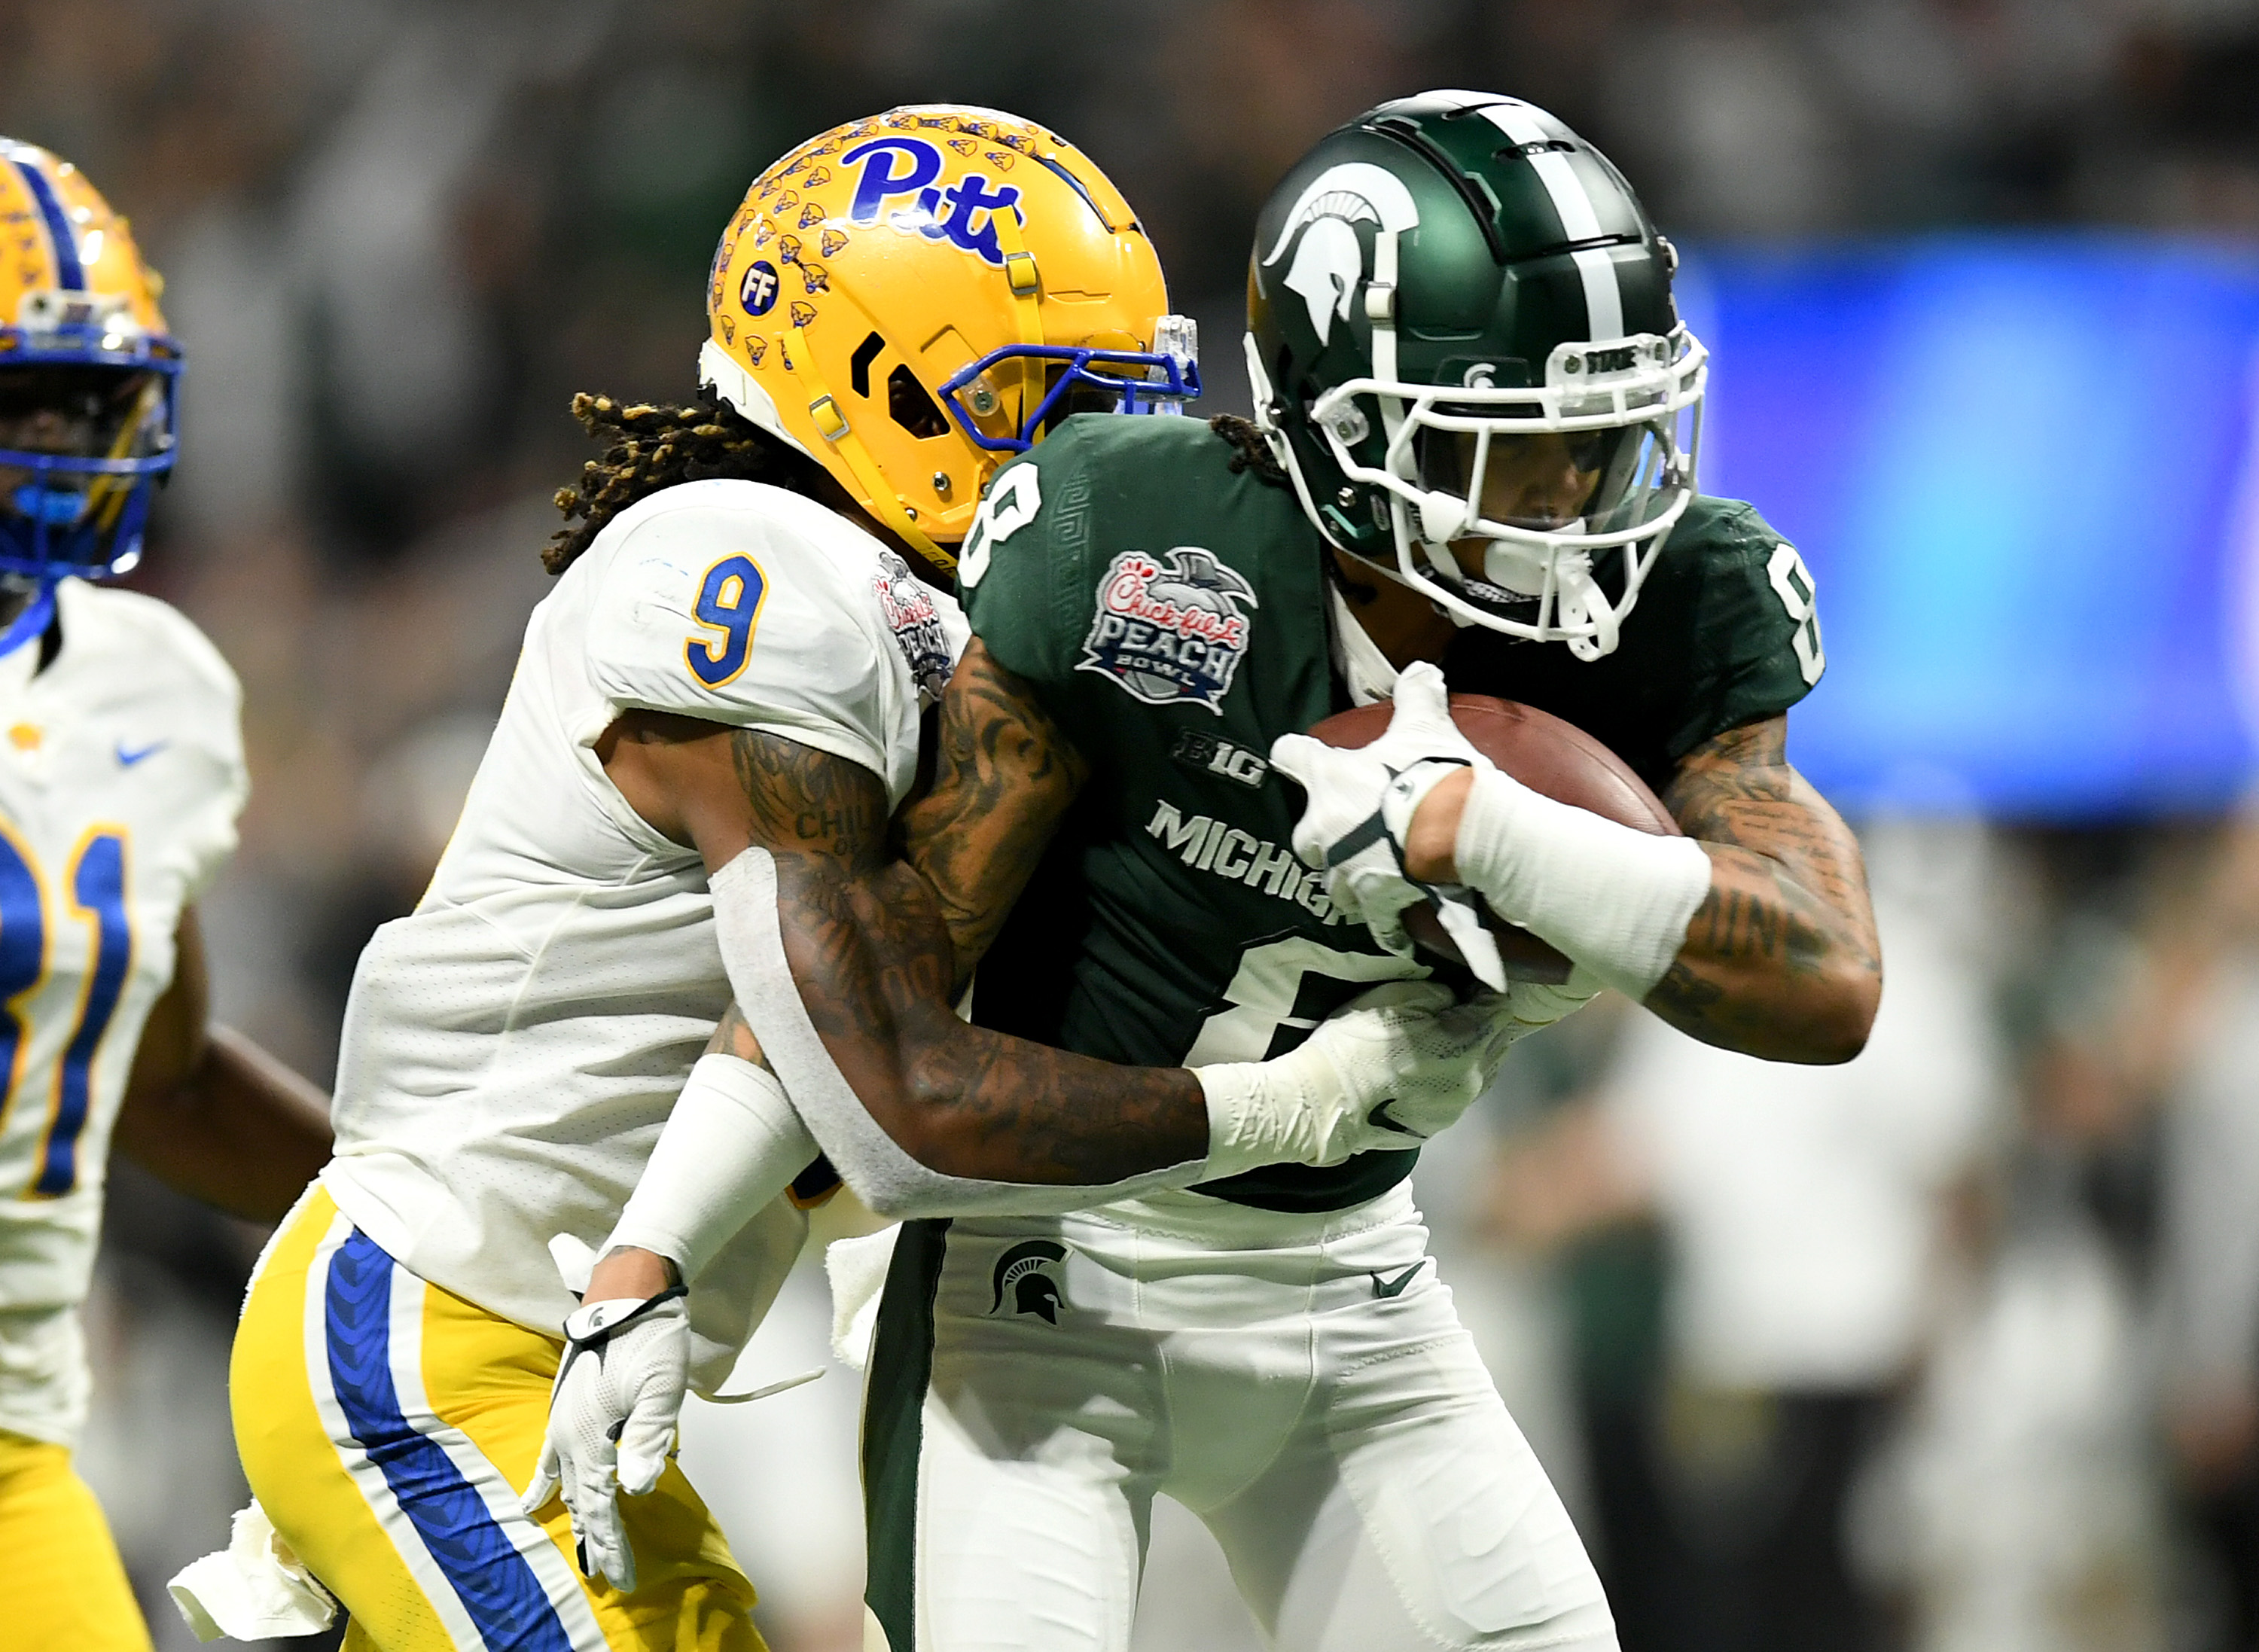 Michigan State Schedule 2022 Here Is Michigan State Football's New 2022 Schedule, With Michigan Game In  Ann Arbor